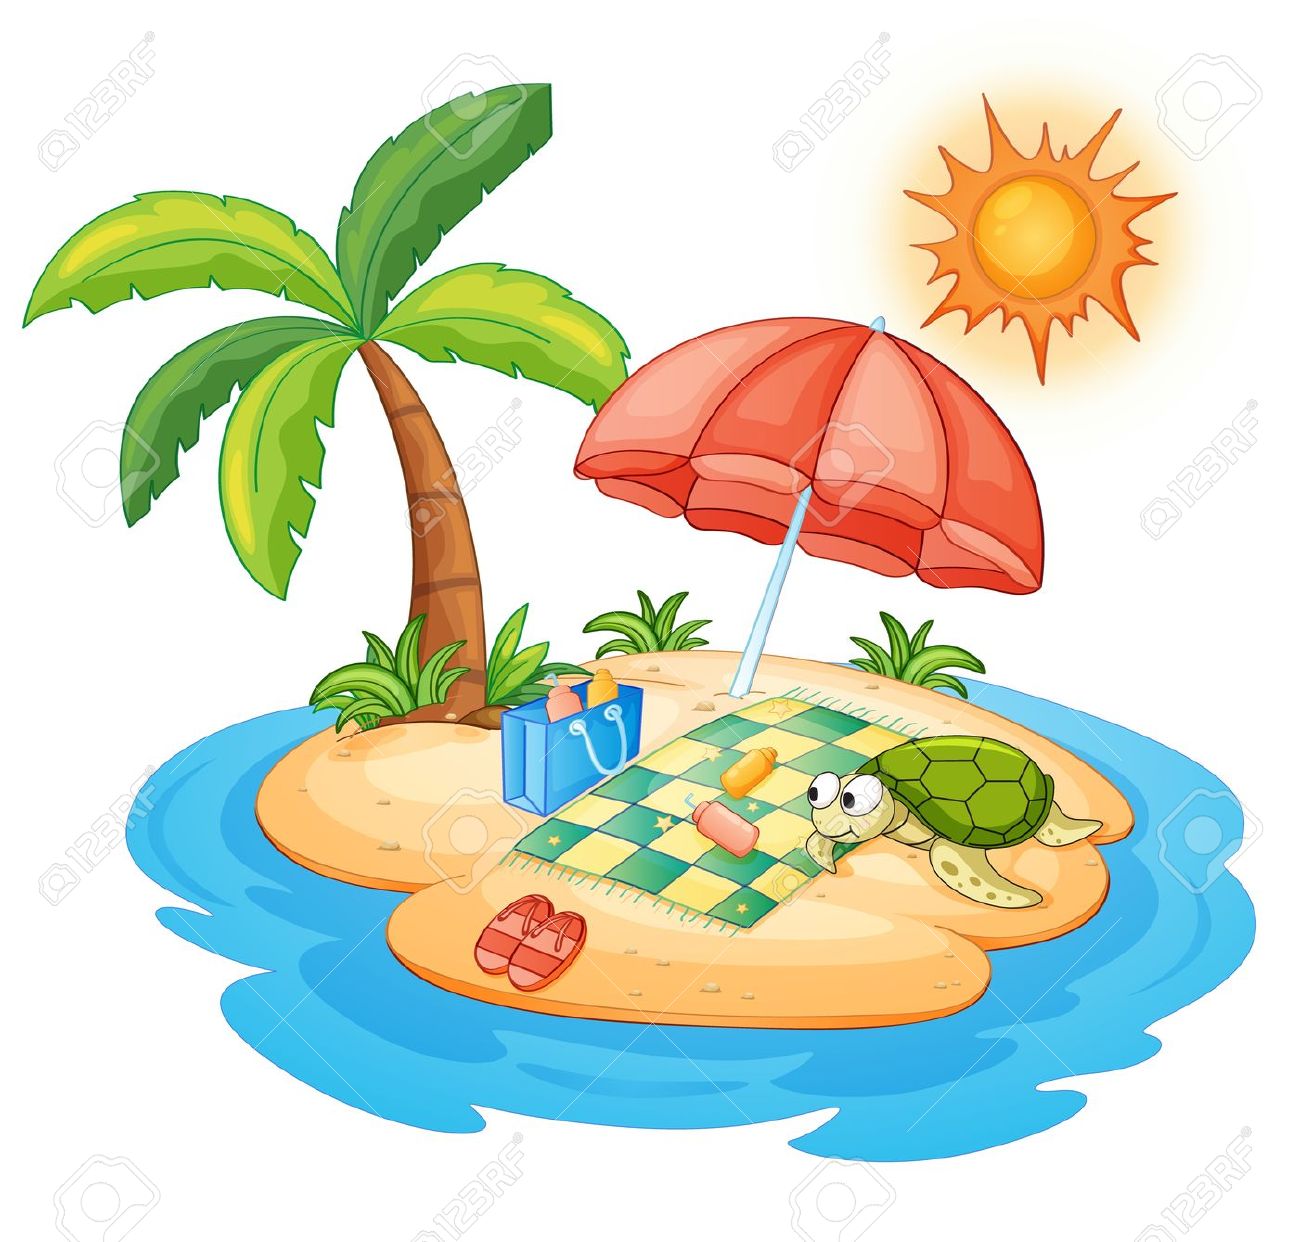 Free cliparts download images. Island clipart holiday island